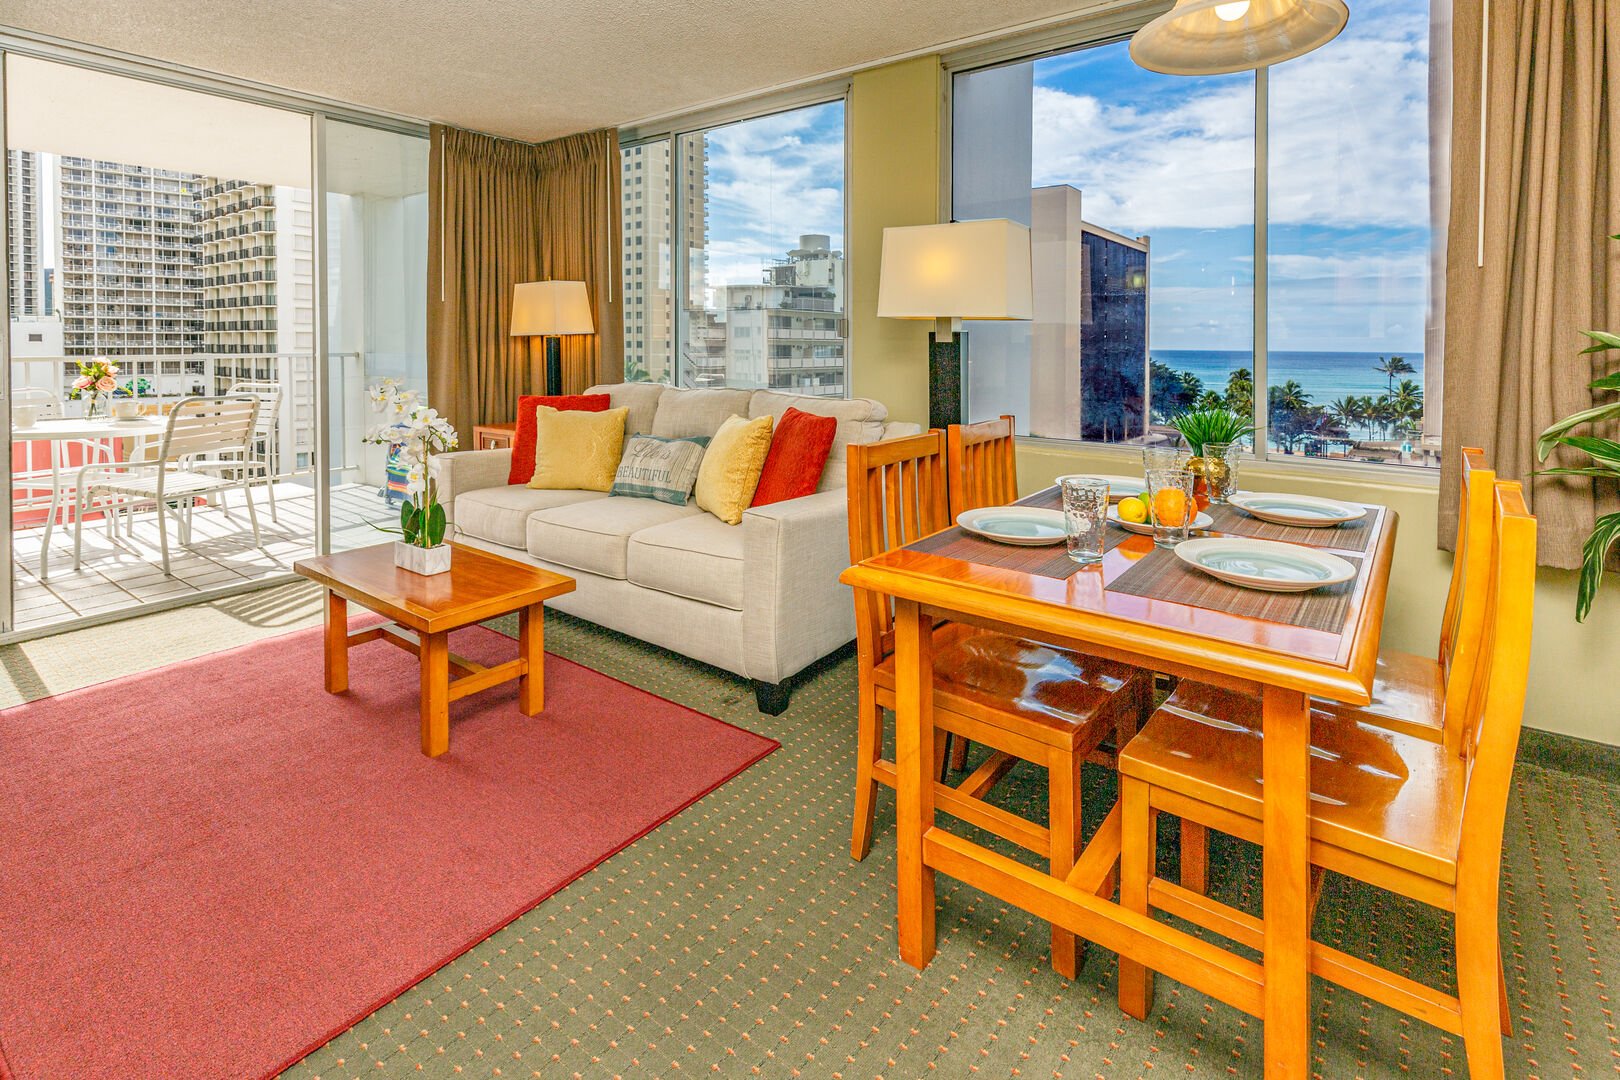 Relax and enjoy your stay in this beautiful condo with stunning ocean views!